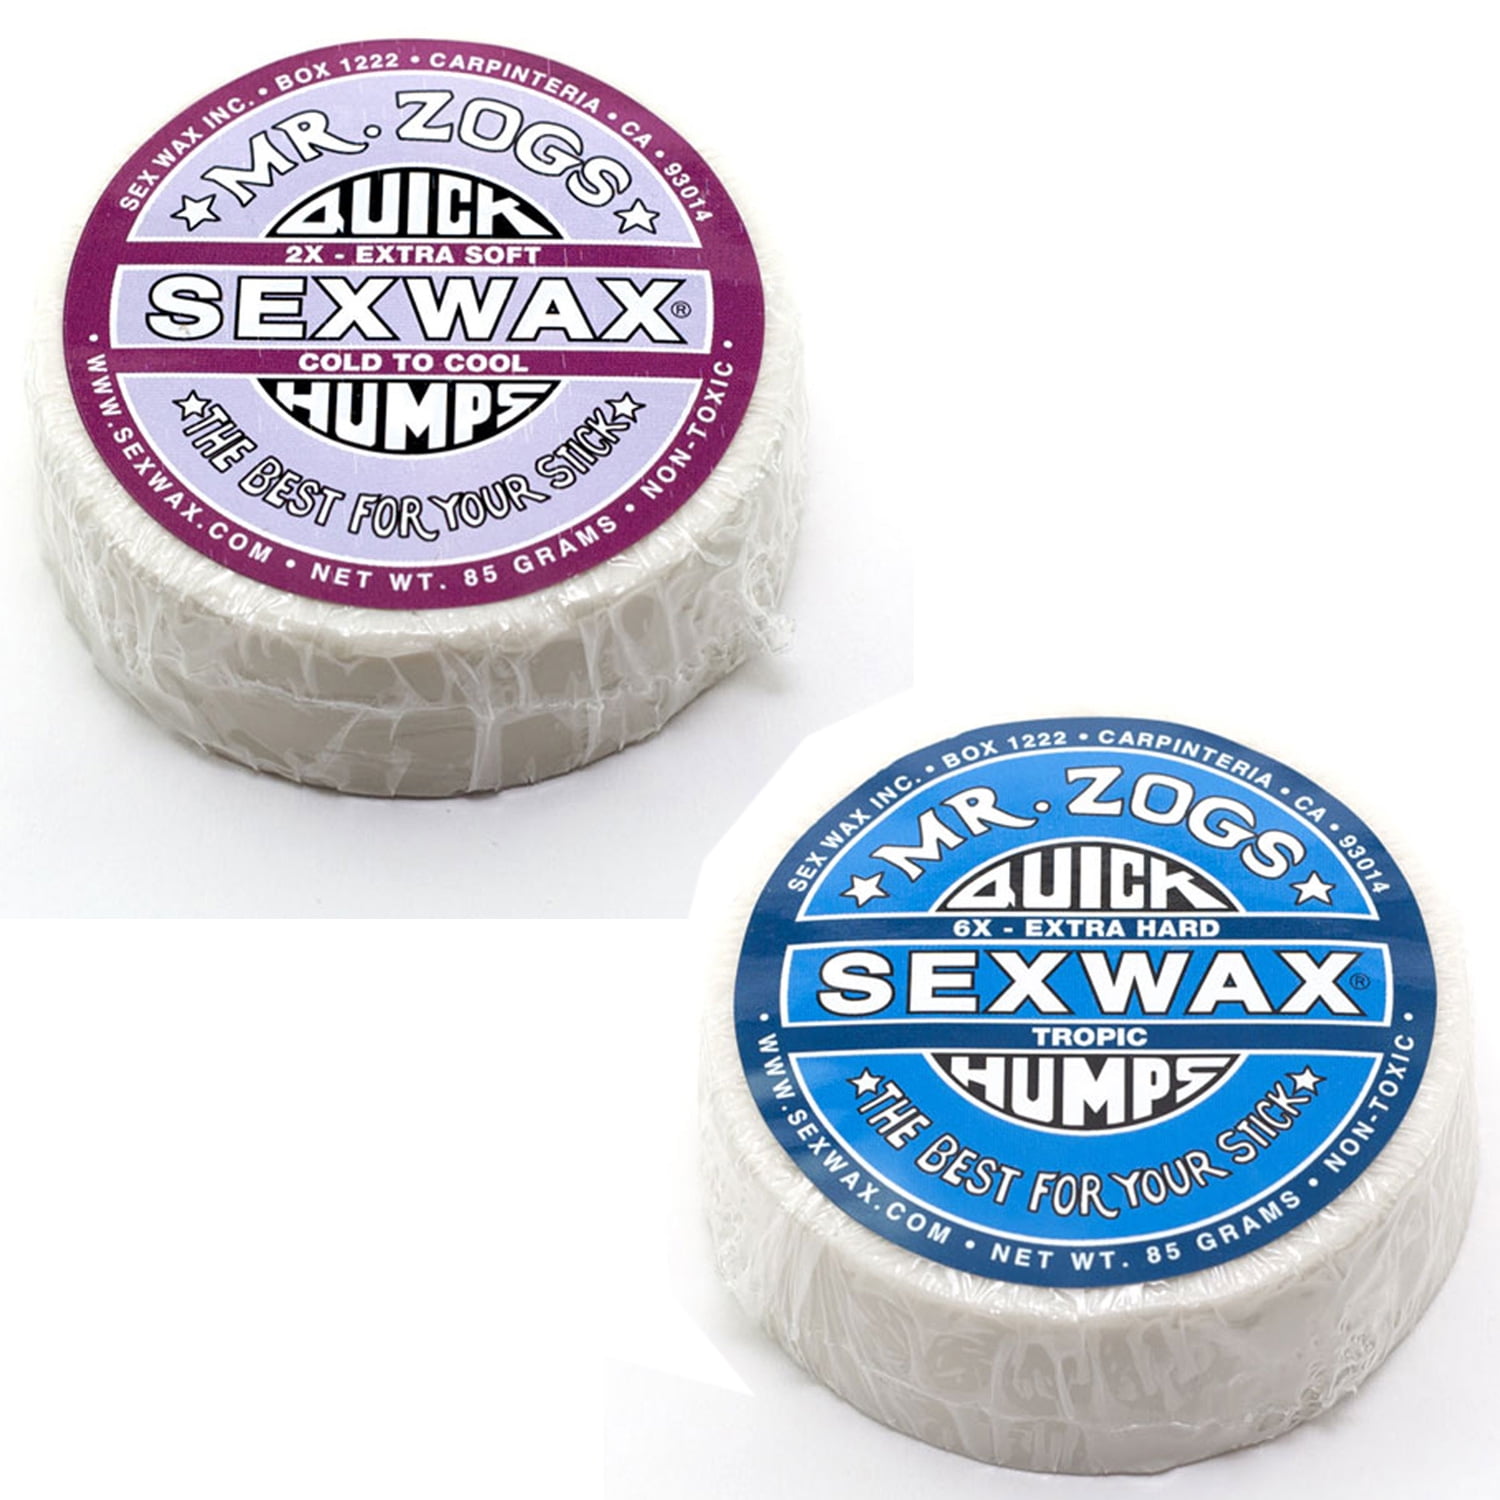 Sex Wax Quick Humps Surf Wax Pack Of 2 2x And 6x Mr Zogs